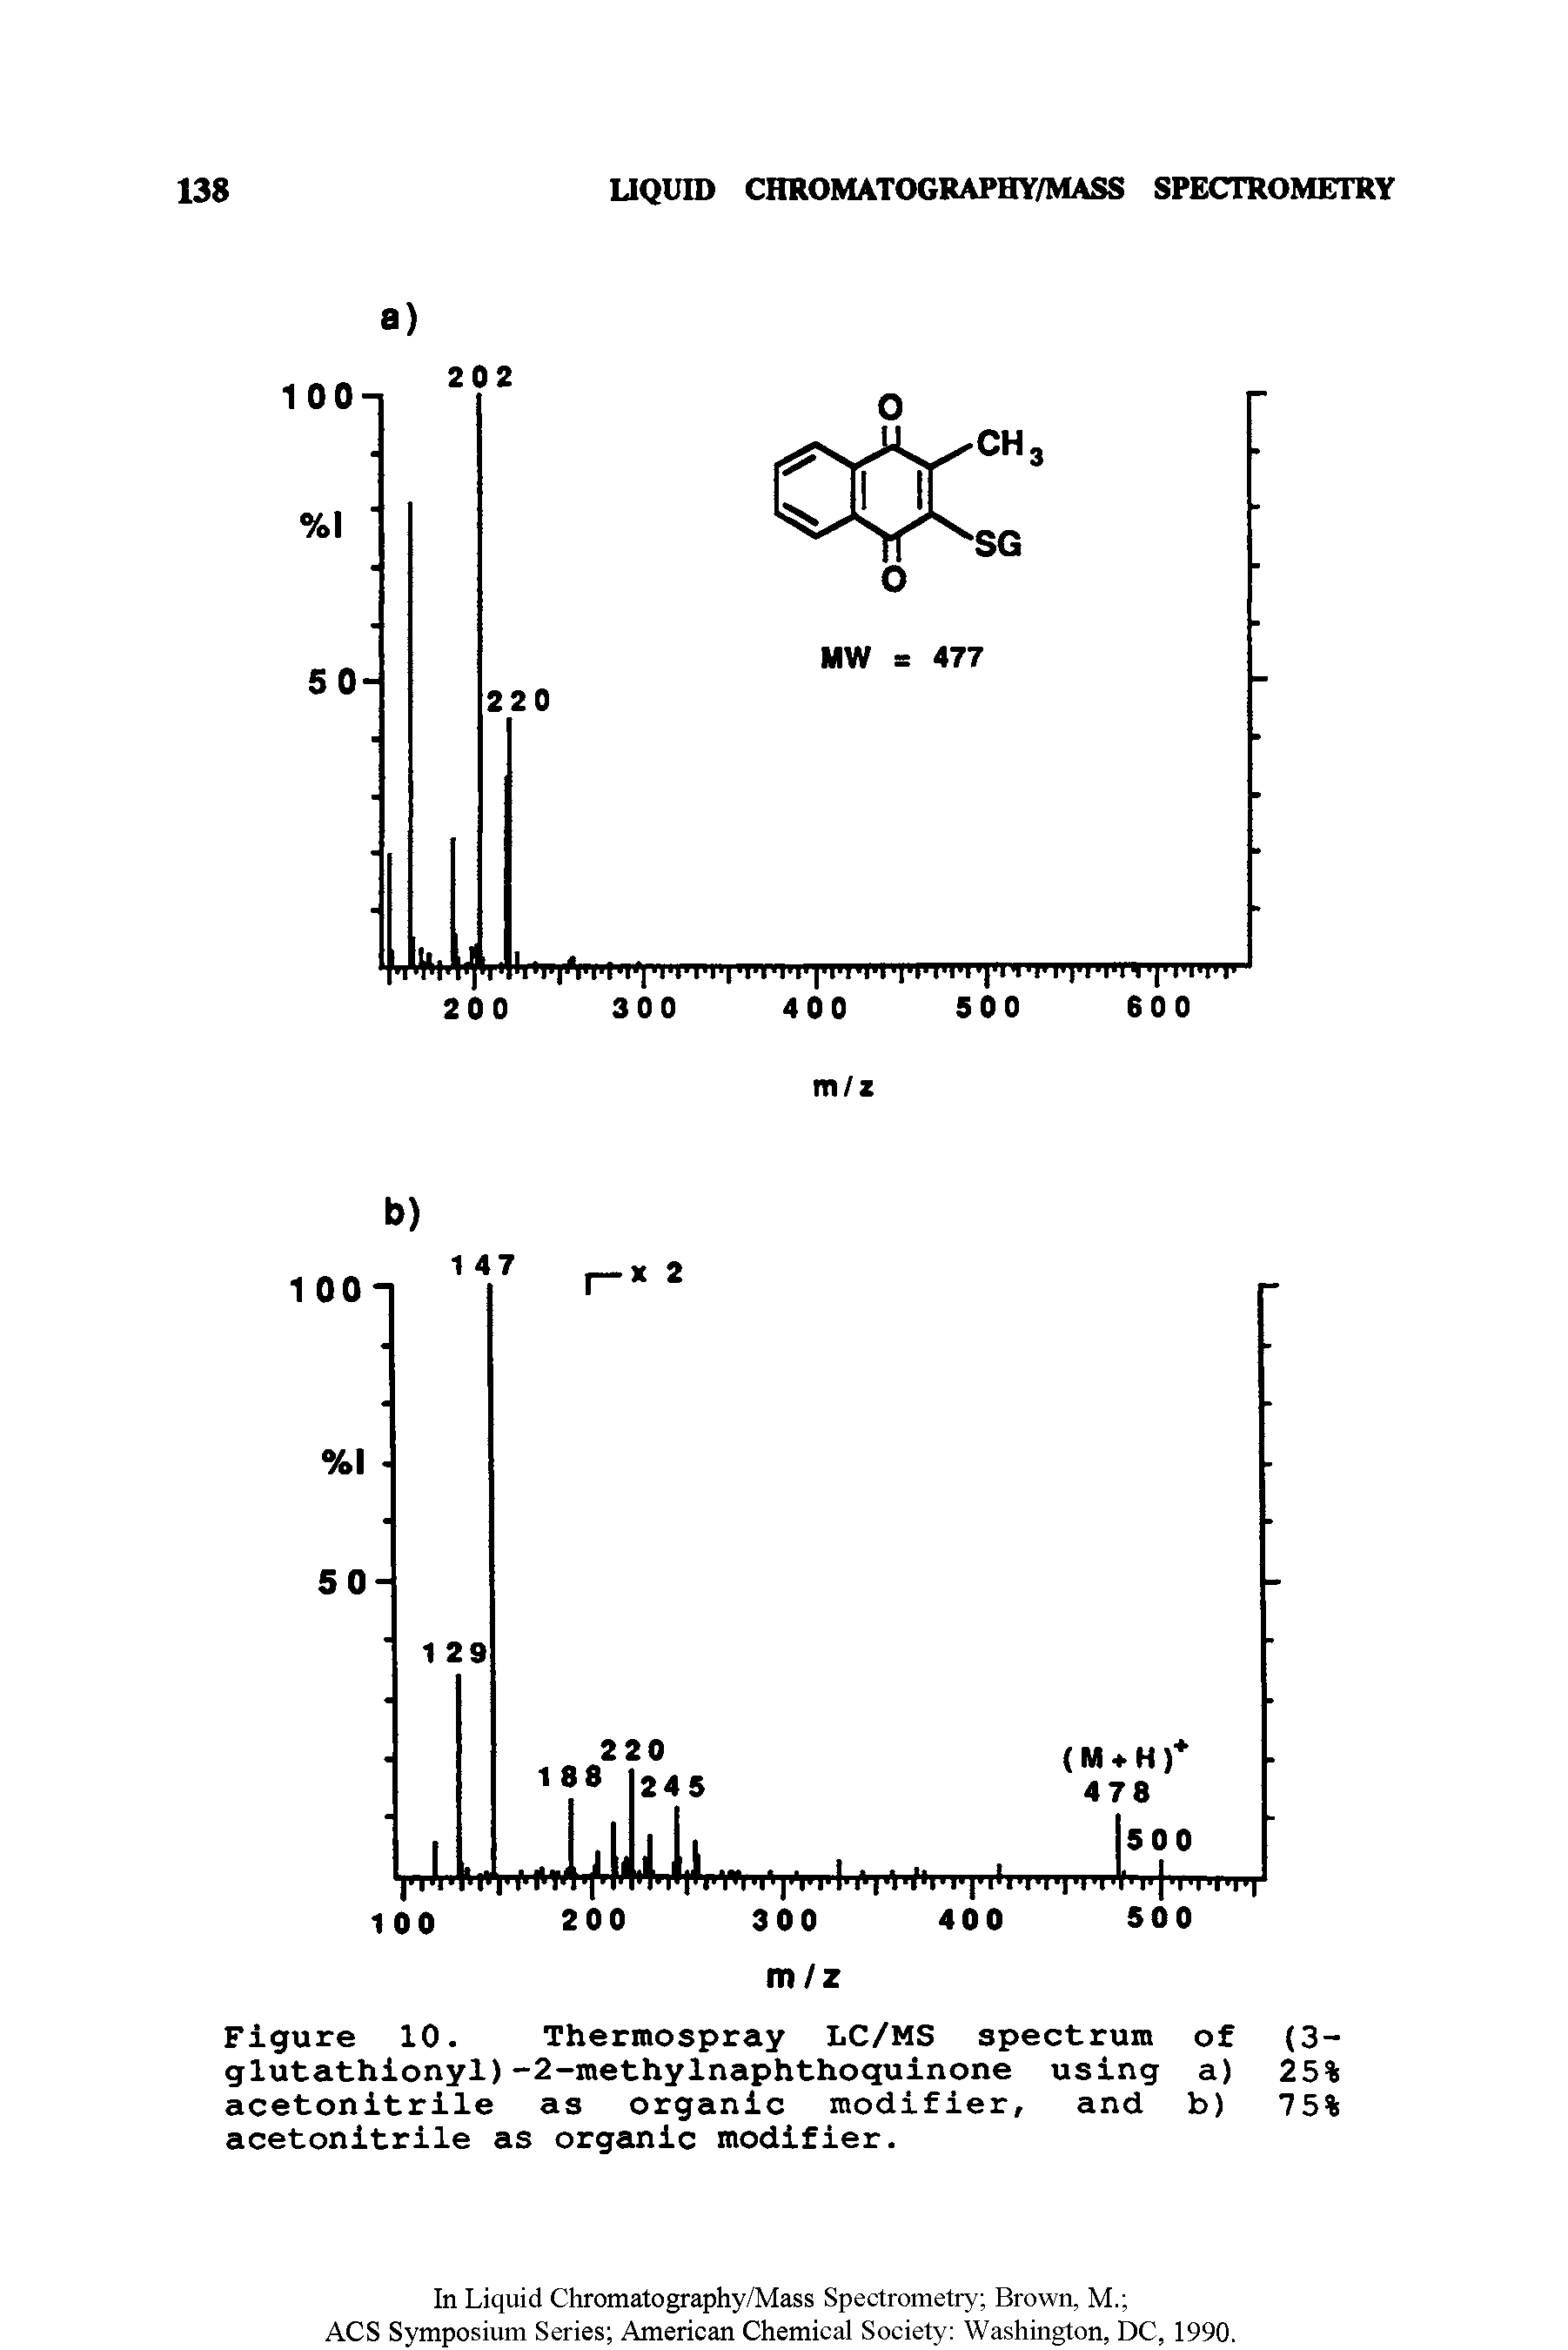 Figure 10. Thermospray LC/MS spectrum of glutathionyl)-2-methylnaphthoquinone using a) acetonitrile as organic modifier, and b) acetonitrile as organic modifier.